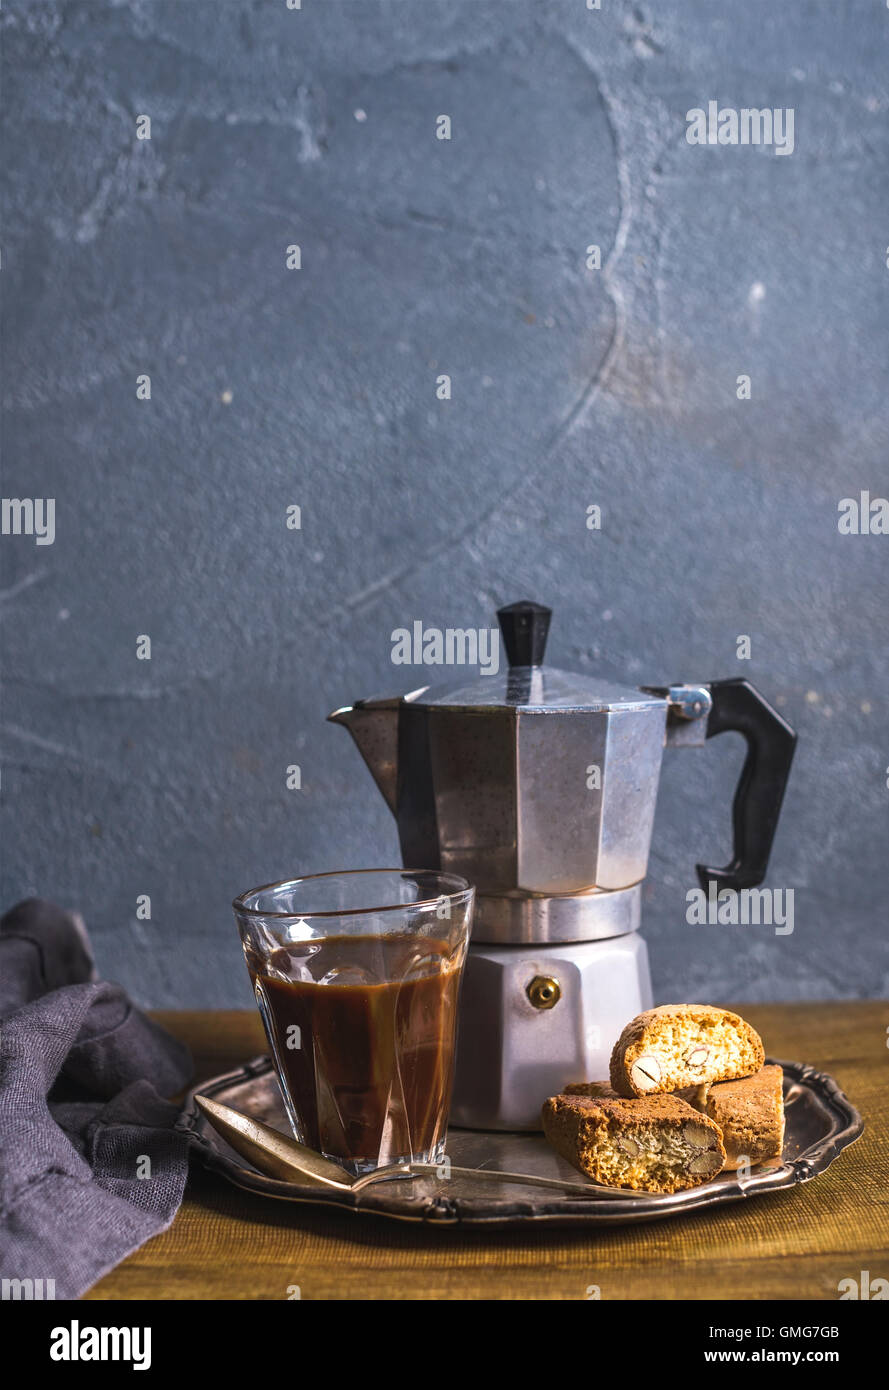 Glass espresso coffee on rustic wooden board, cantucci biscuits and steel Italian Moka pot, grey background Stock Photo